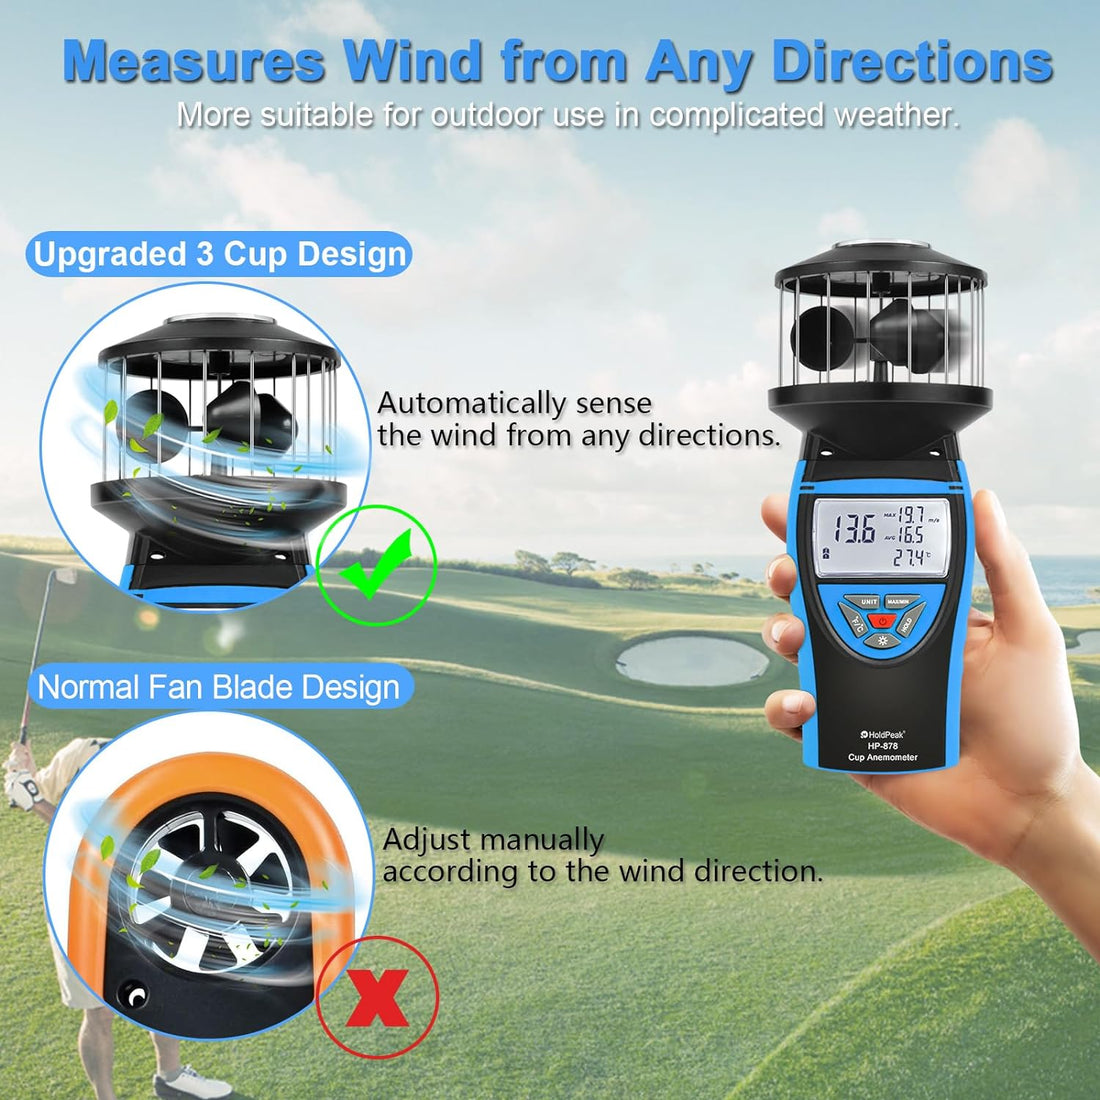 Digital Anemometer with Compass, HOLDPEAK HP-878 Cup Wind Speed Meter for Outdoor with 360° Wind Measuring, 0.7-42m/s High Accuracy Handheld Wind Gauge, LED Display, MAX/MIN, Auto Shut Down, ℃/℉